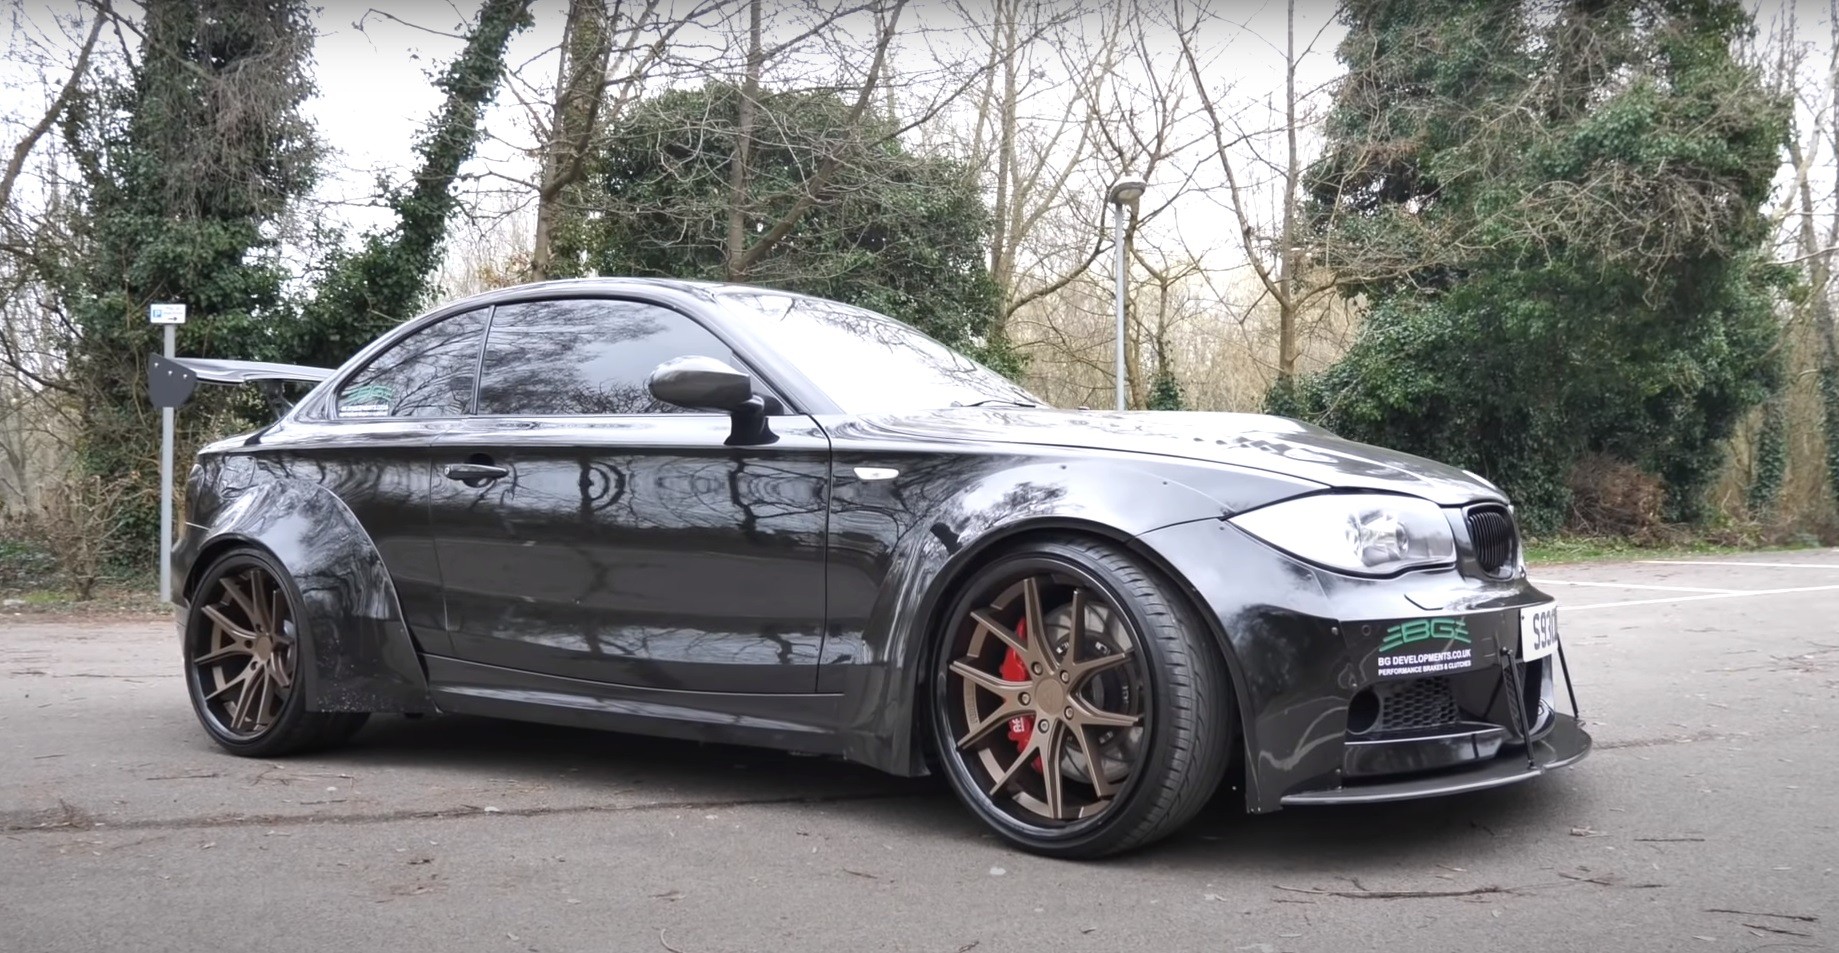 685 Hp Bmw 1 Series Coupe Hides Supercharged V8 Engine Struggles To Go Straight Autoevolution